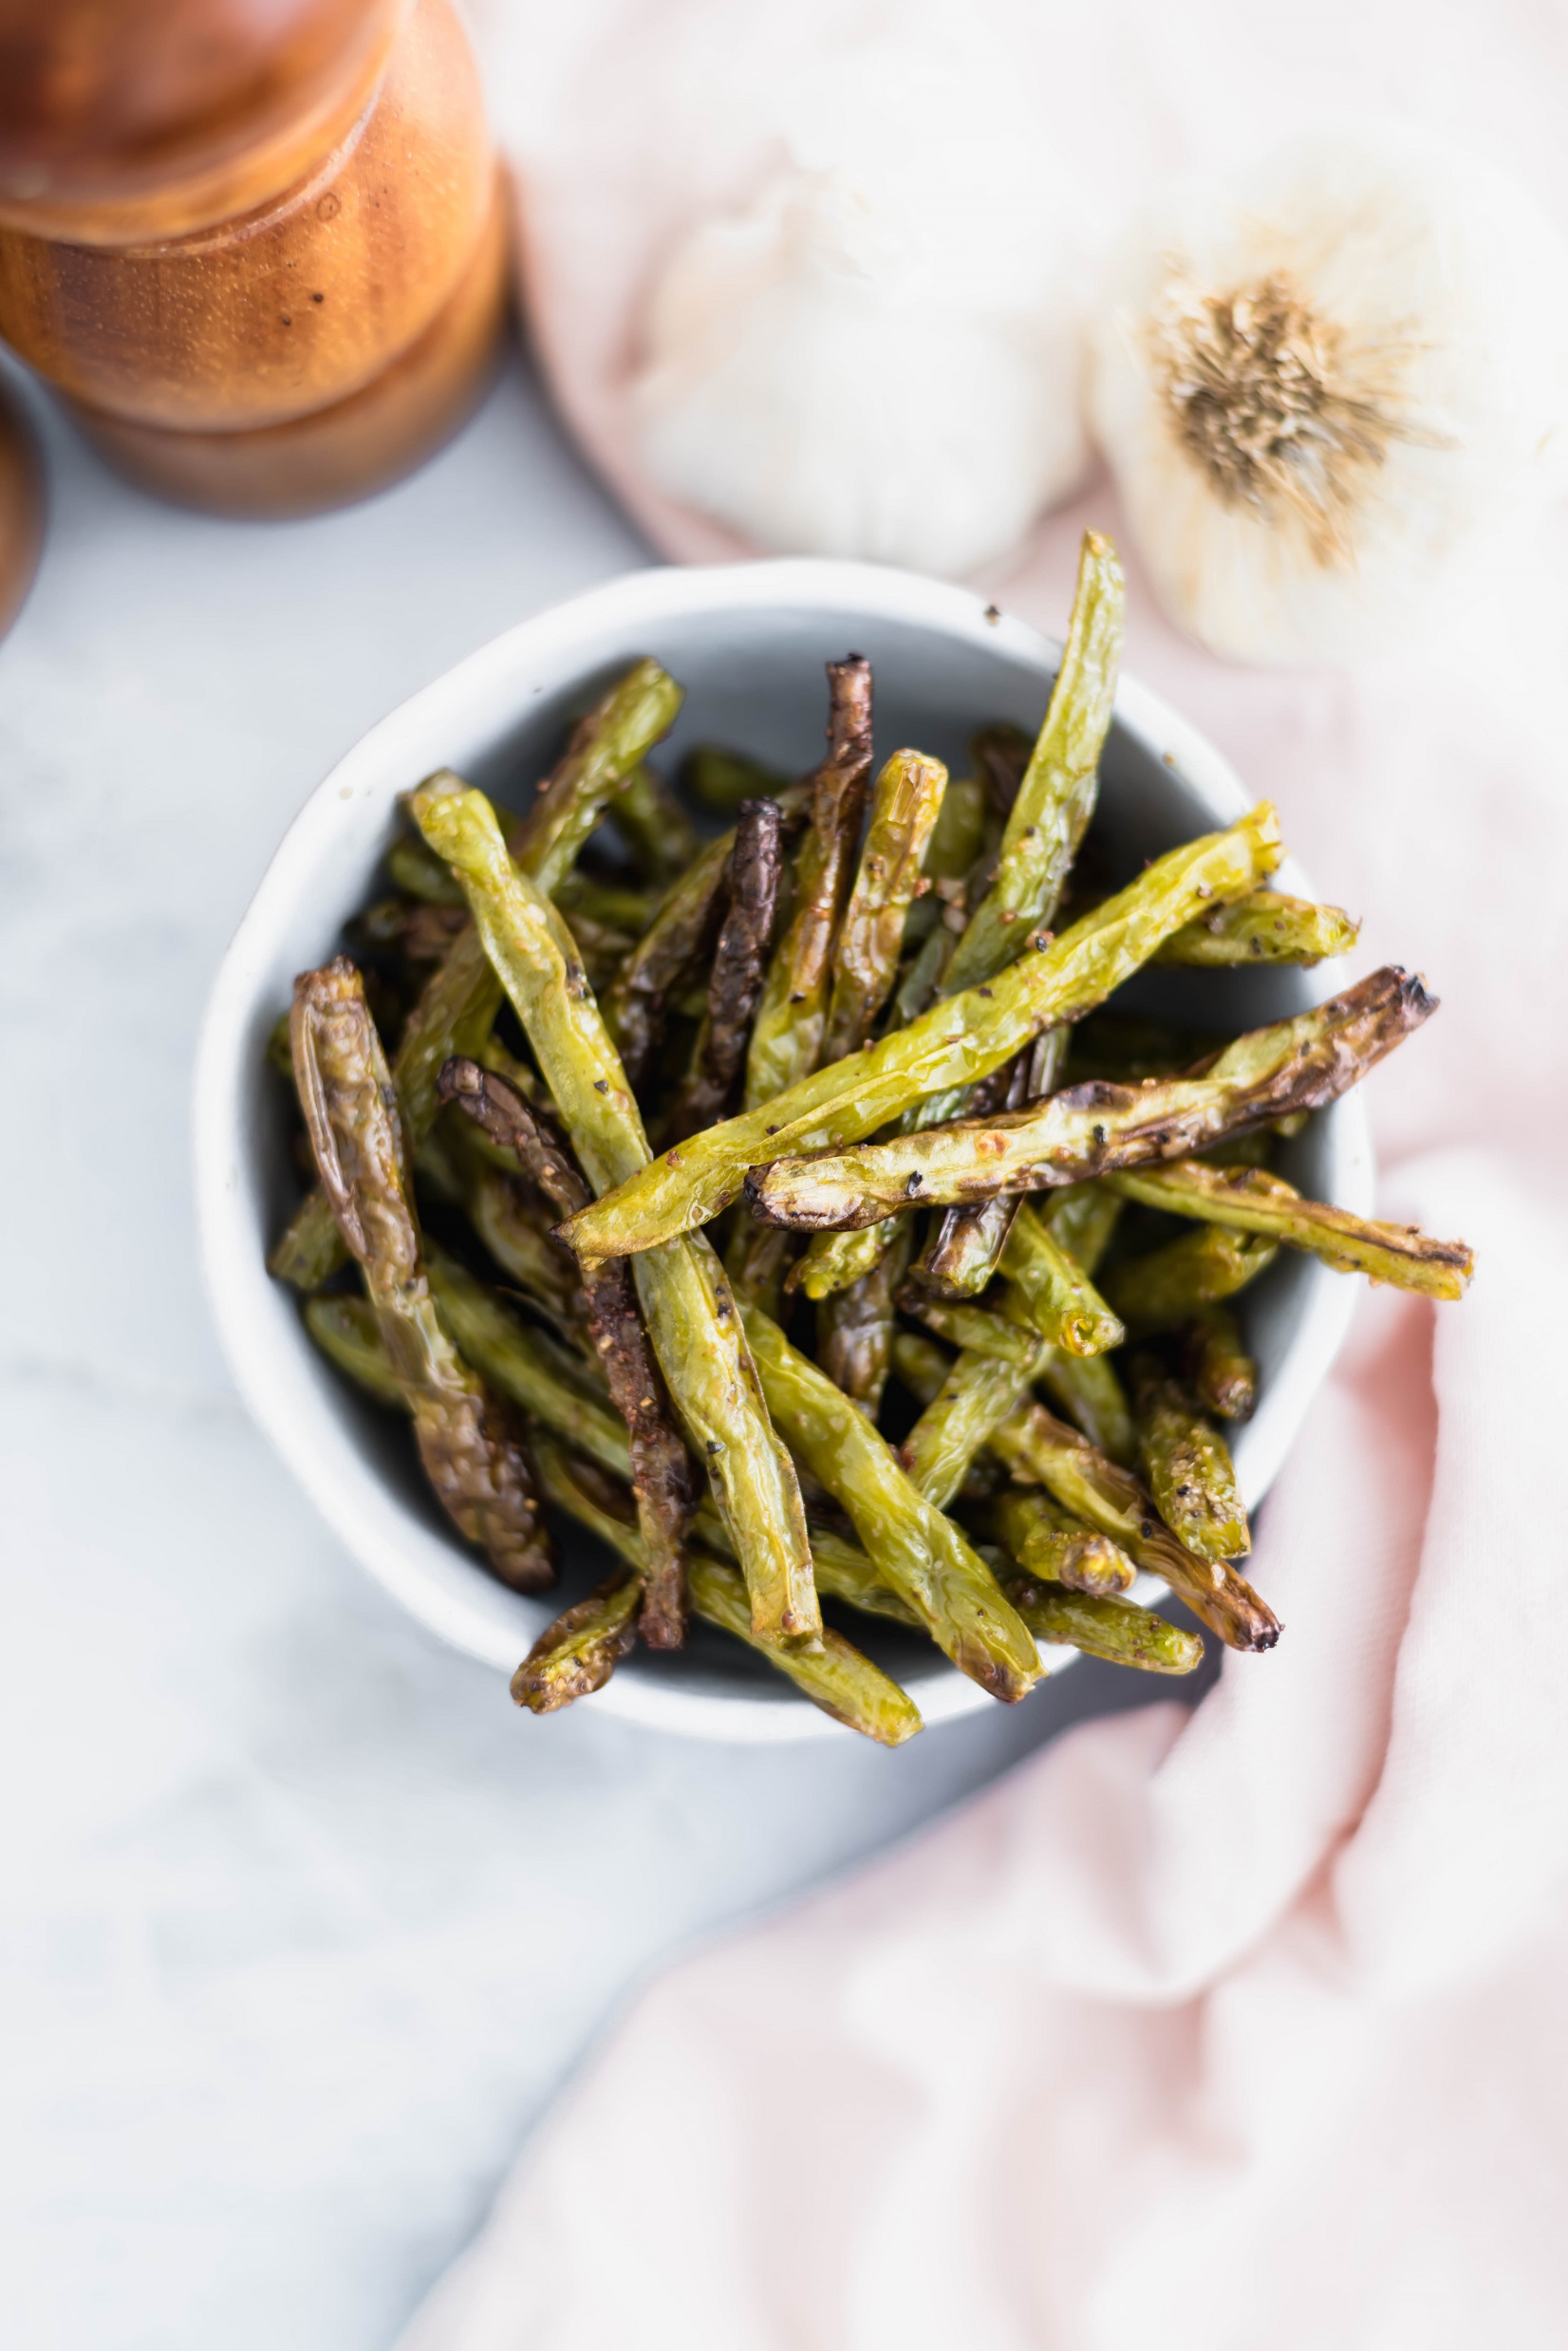 These easy Roasted Green Beans make a super easy weeknight side dish. 20 minutes from start to finish. Use fresh green beans for the most amazing flavor.